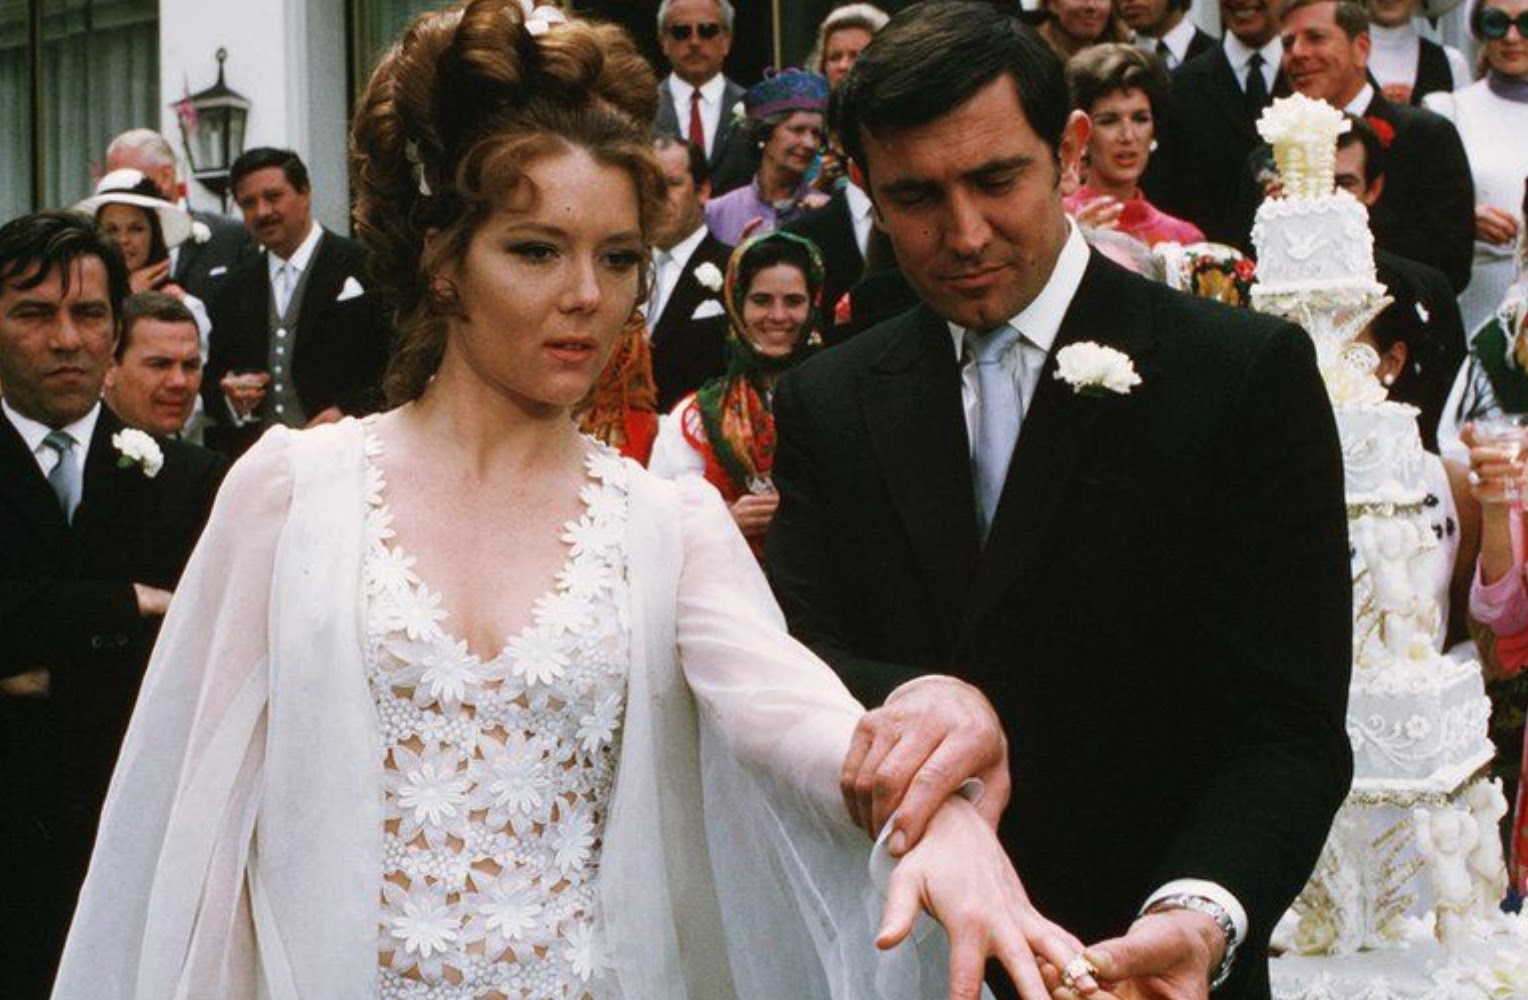 Diana Rigg and George Lazenby as James Bond in On Her Majesty's Secret Service